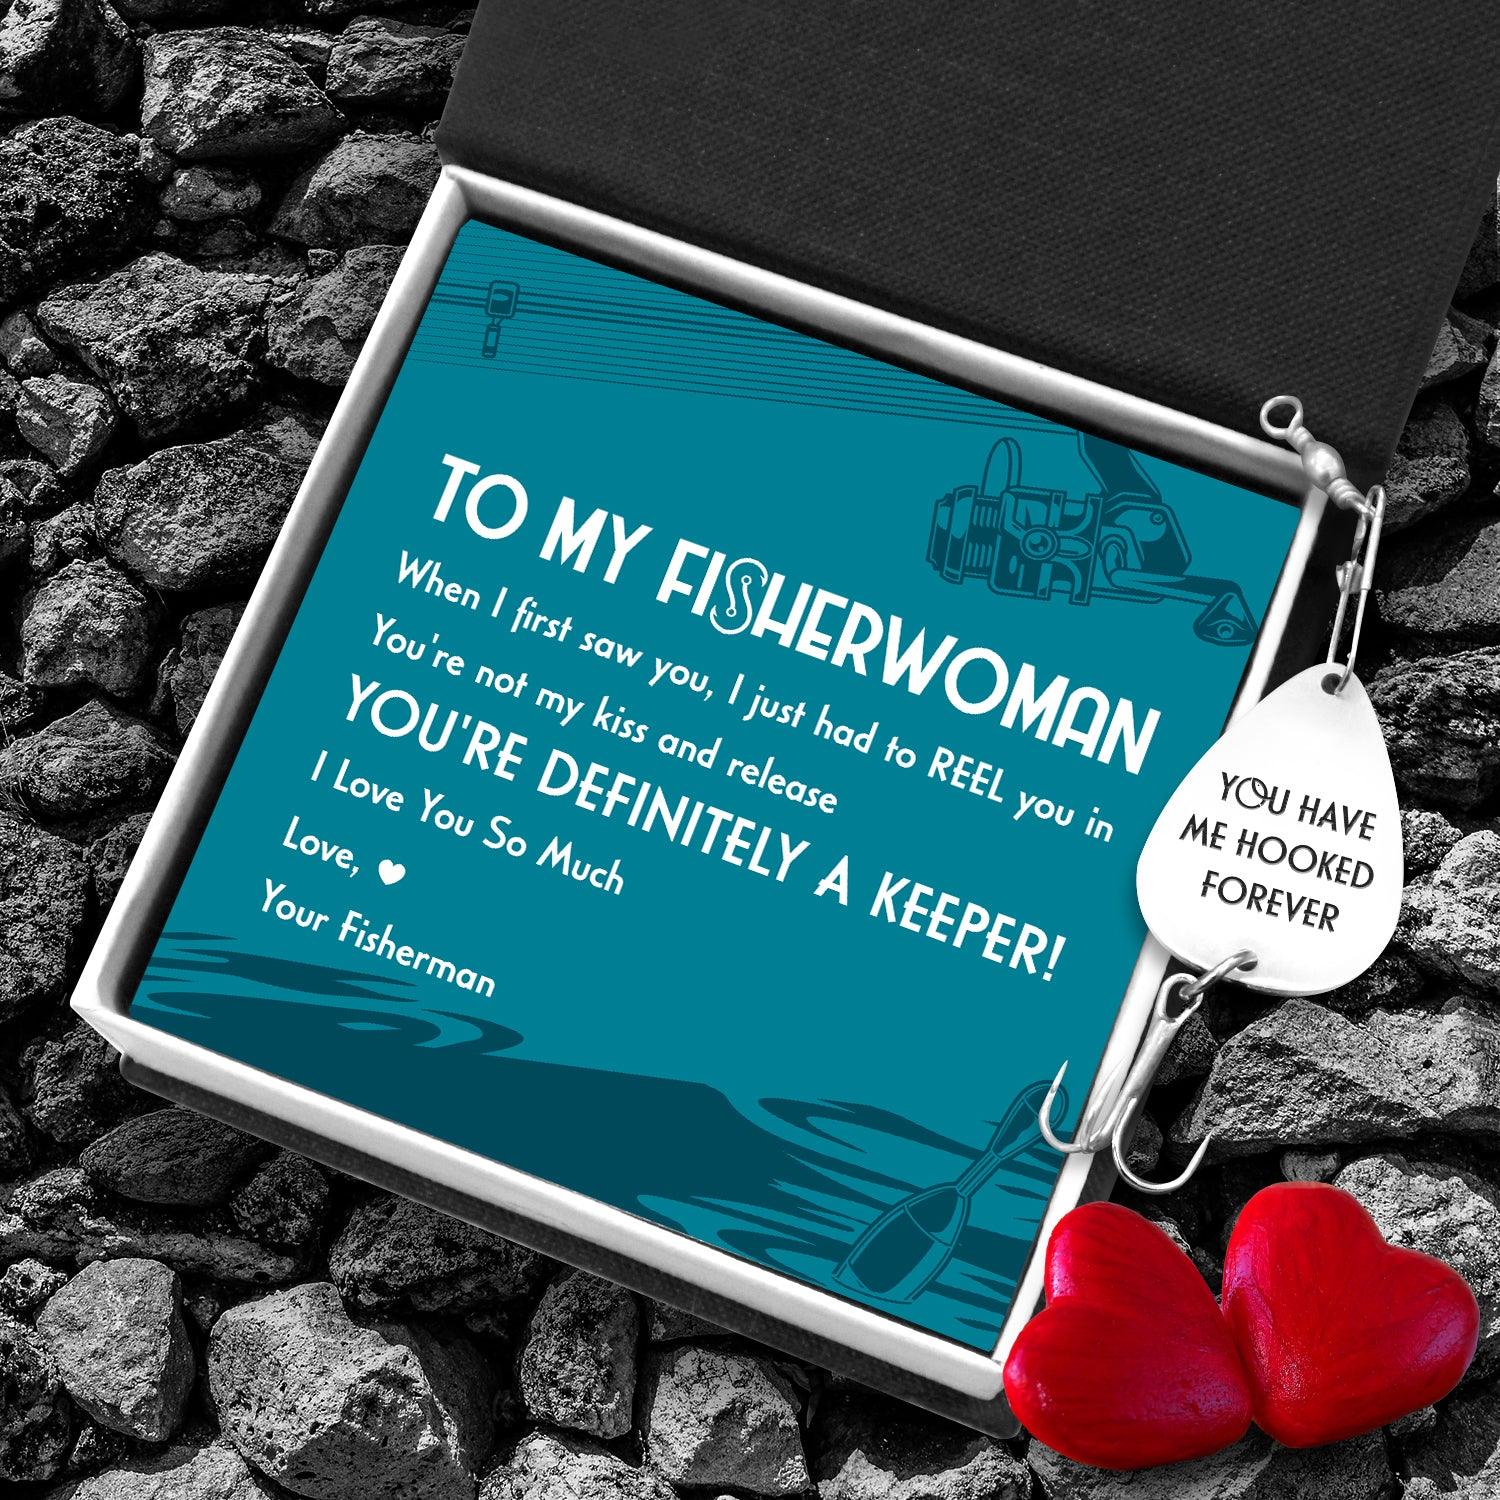 Engraved Fishing Hook - Fishing - To My Fisherwoman - I Love You So Much - Augfa13011 - Gifts Holder